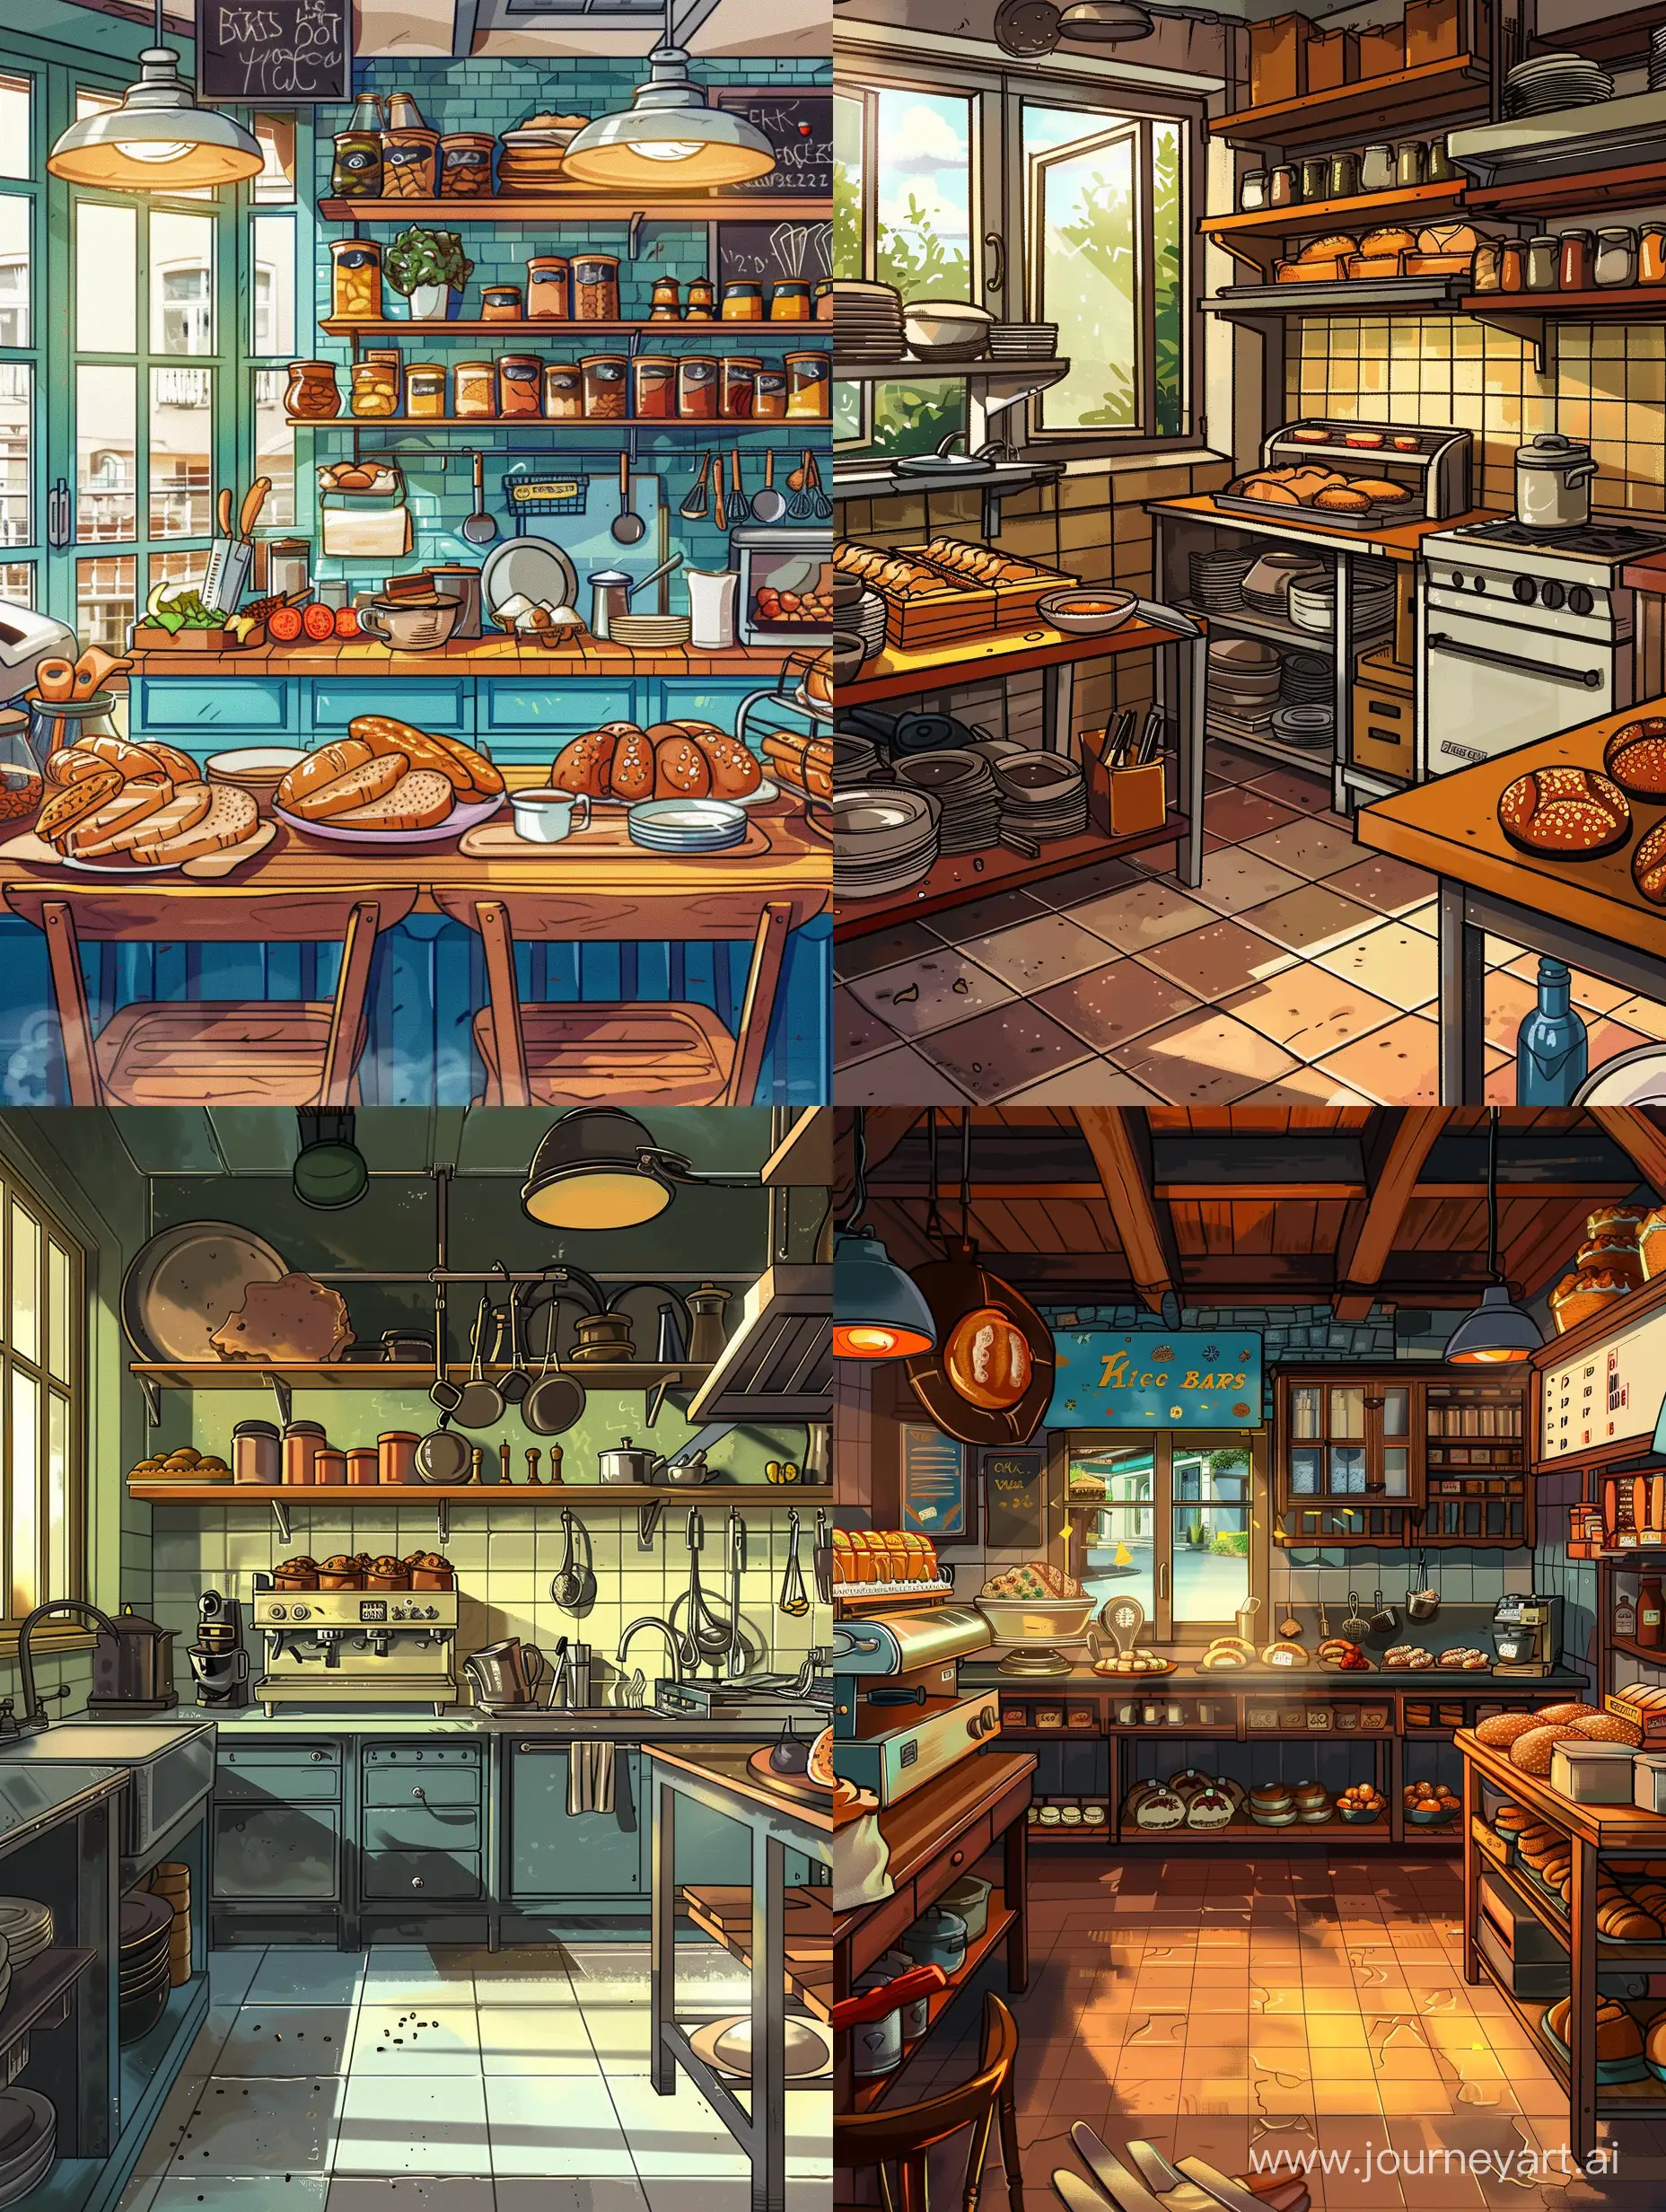 Whimsical-Bakery-Kitchen-Scene-for-a-Fun-Video-Game-Adventure